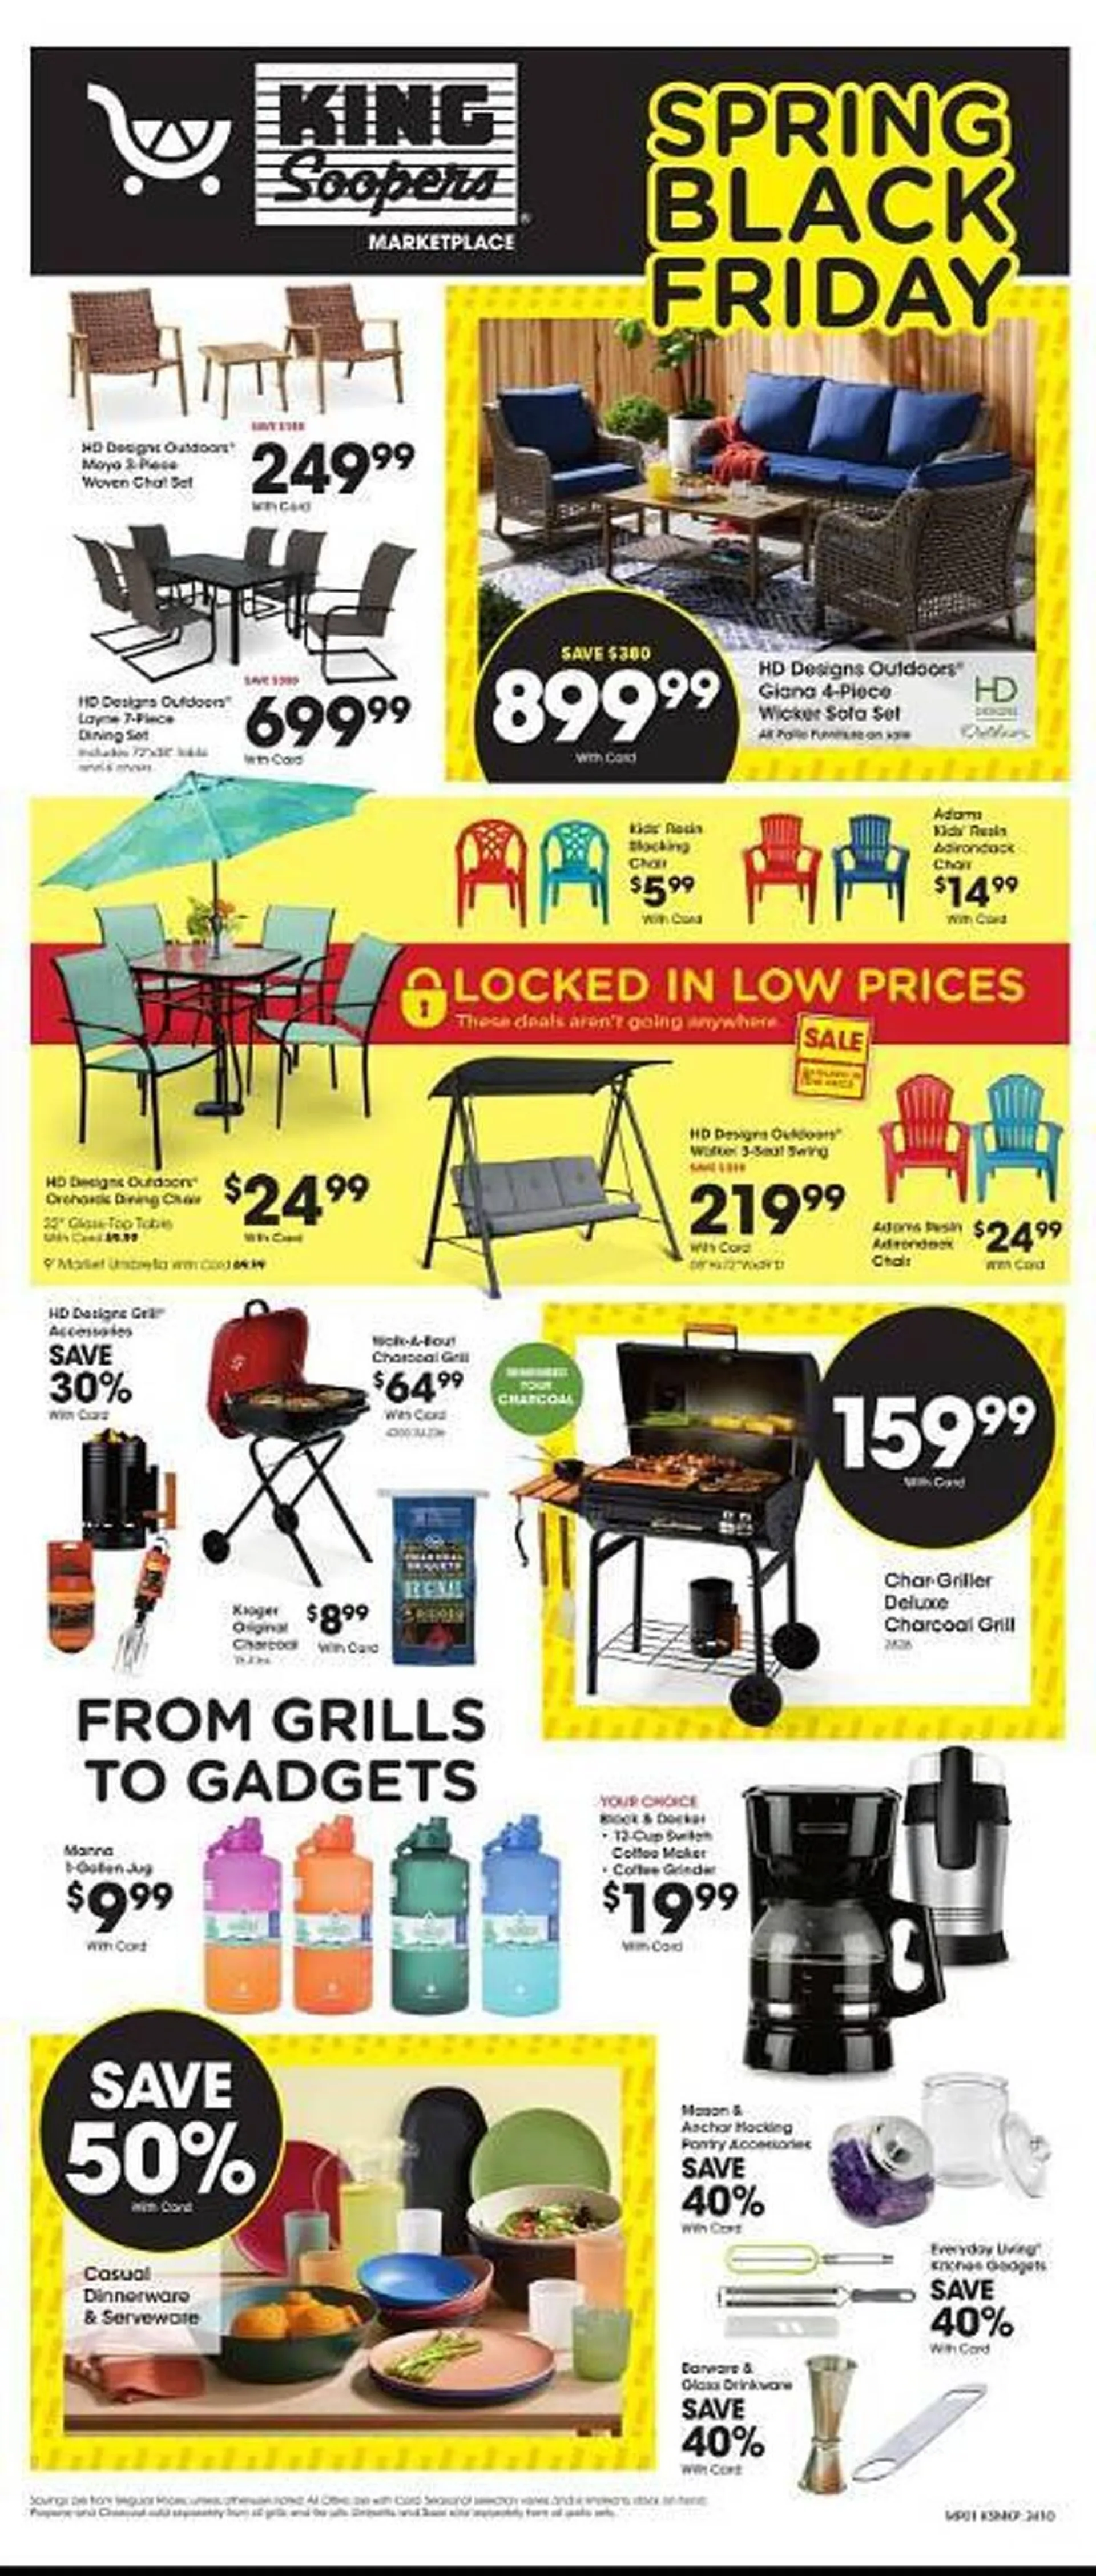 Weekly ad King Soopers Weekly Ad from April 10 to April 16 2024 - Page 1